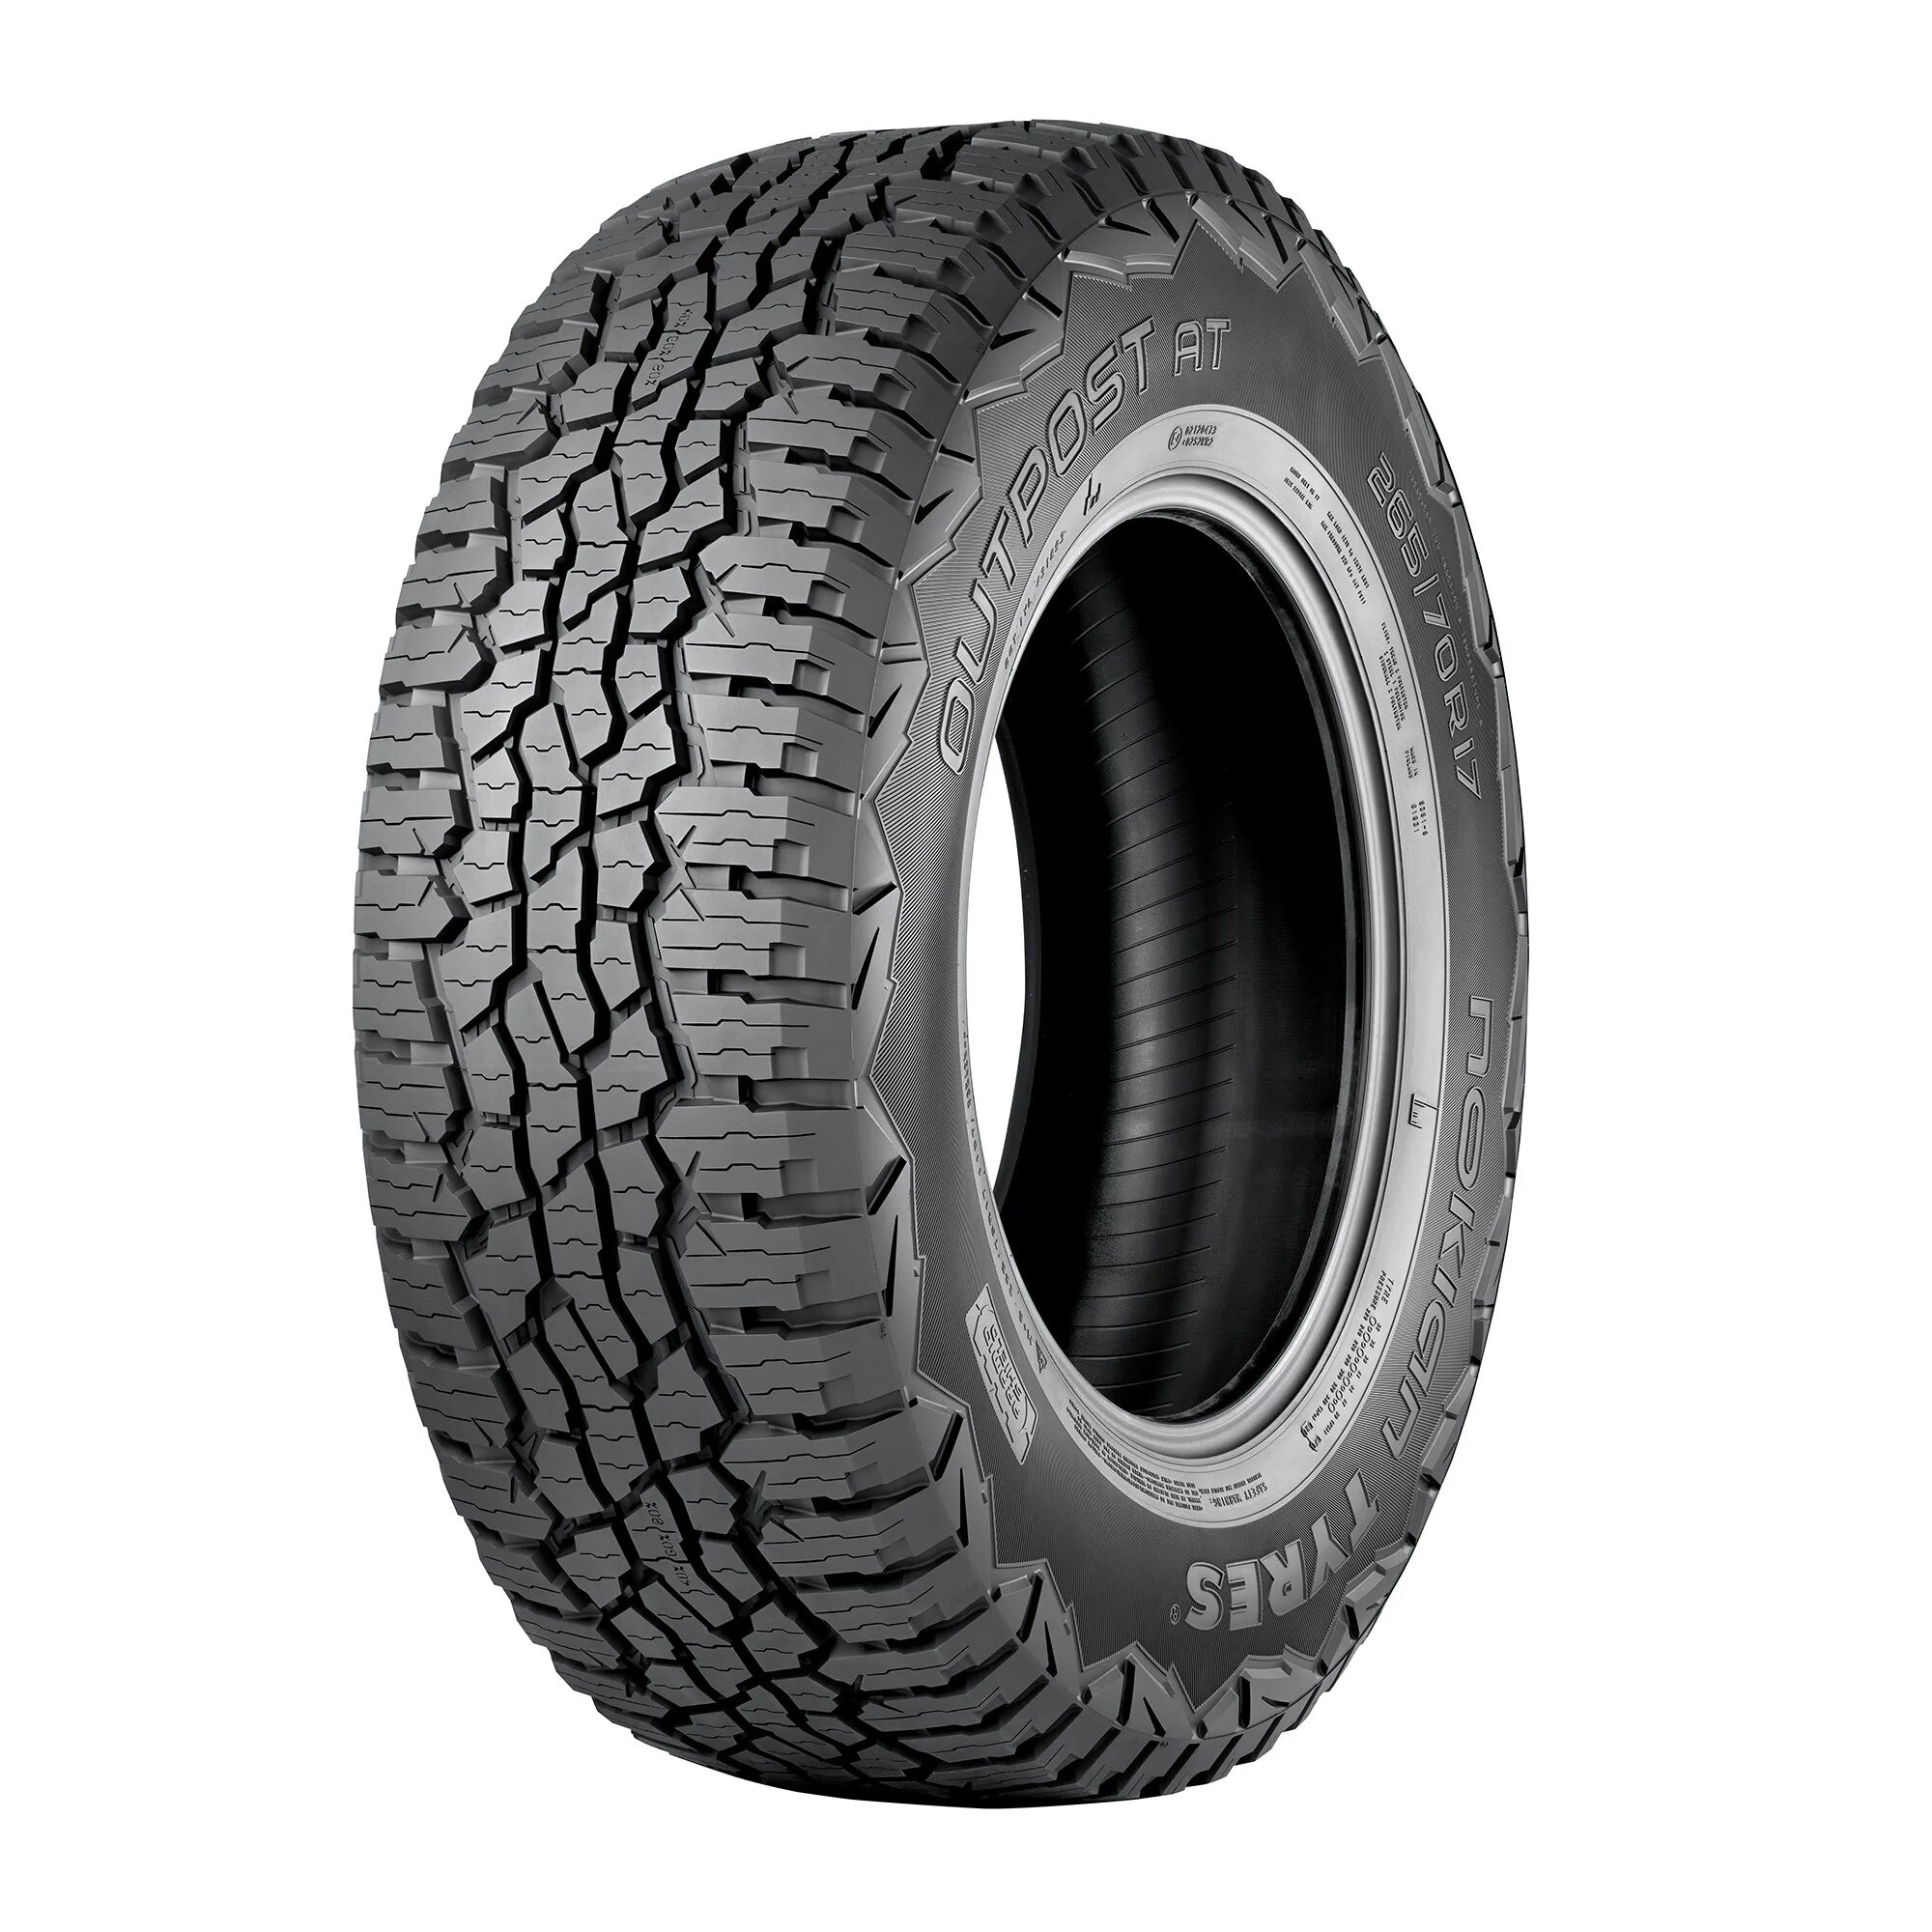 Nokian Outpost at 265/70 r16. Nokian Tyres Outpost at 215/65 r16. Нокиан оутпост АТ 245/70 r17. Шина Nokian Outpost at.